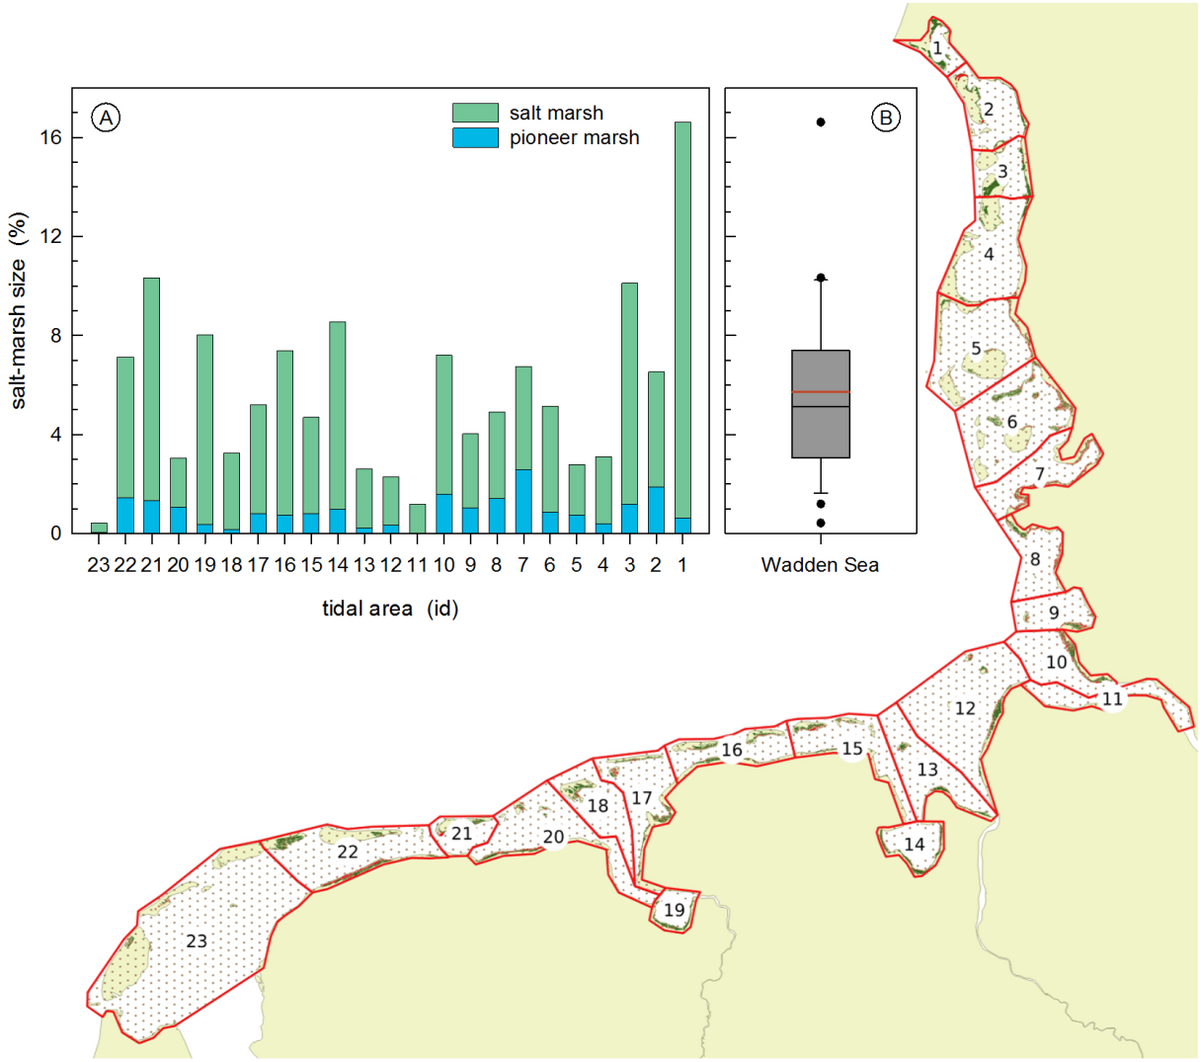  Distribution of salt marshes in the Wadden Sea